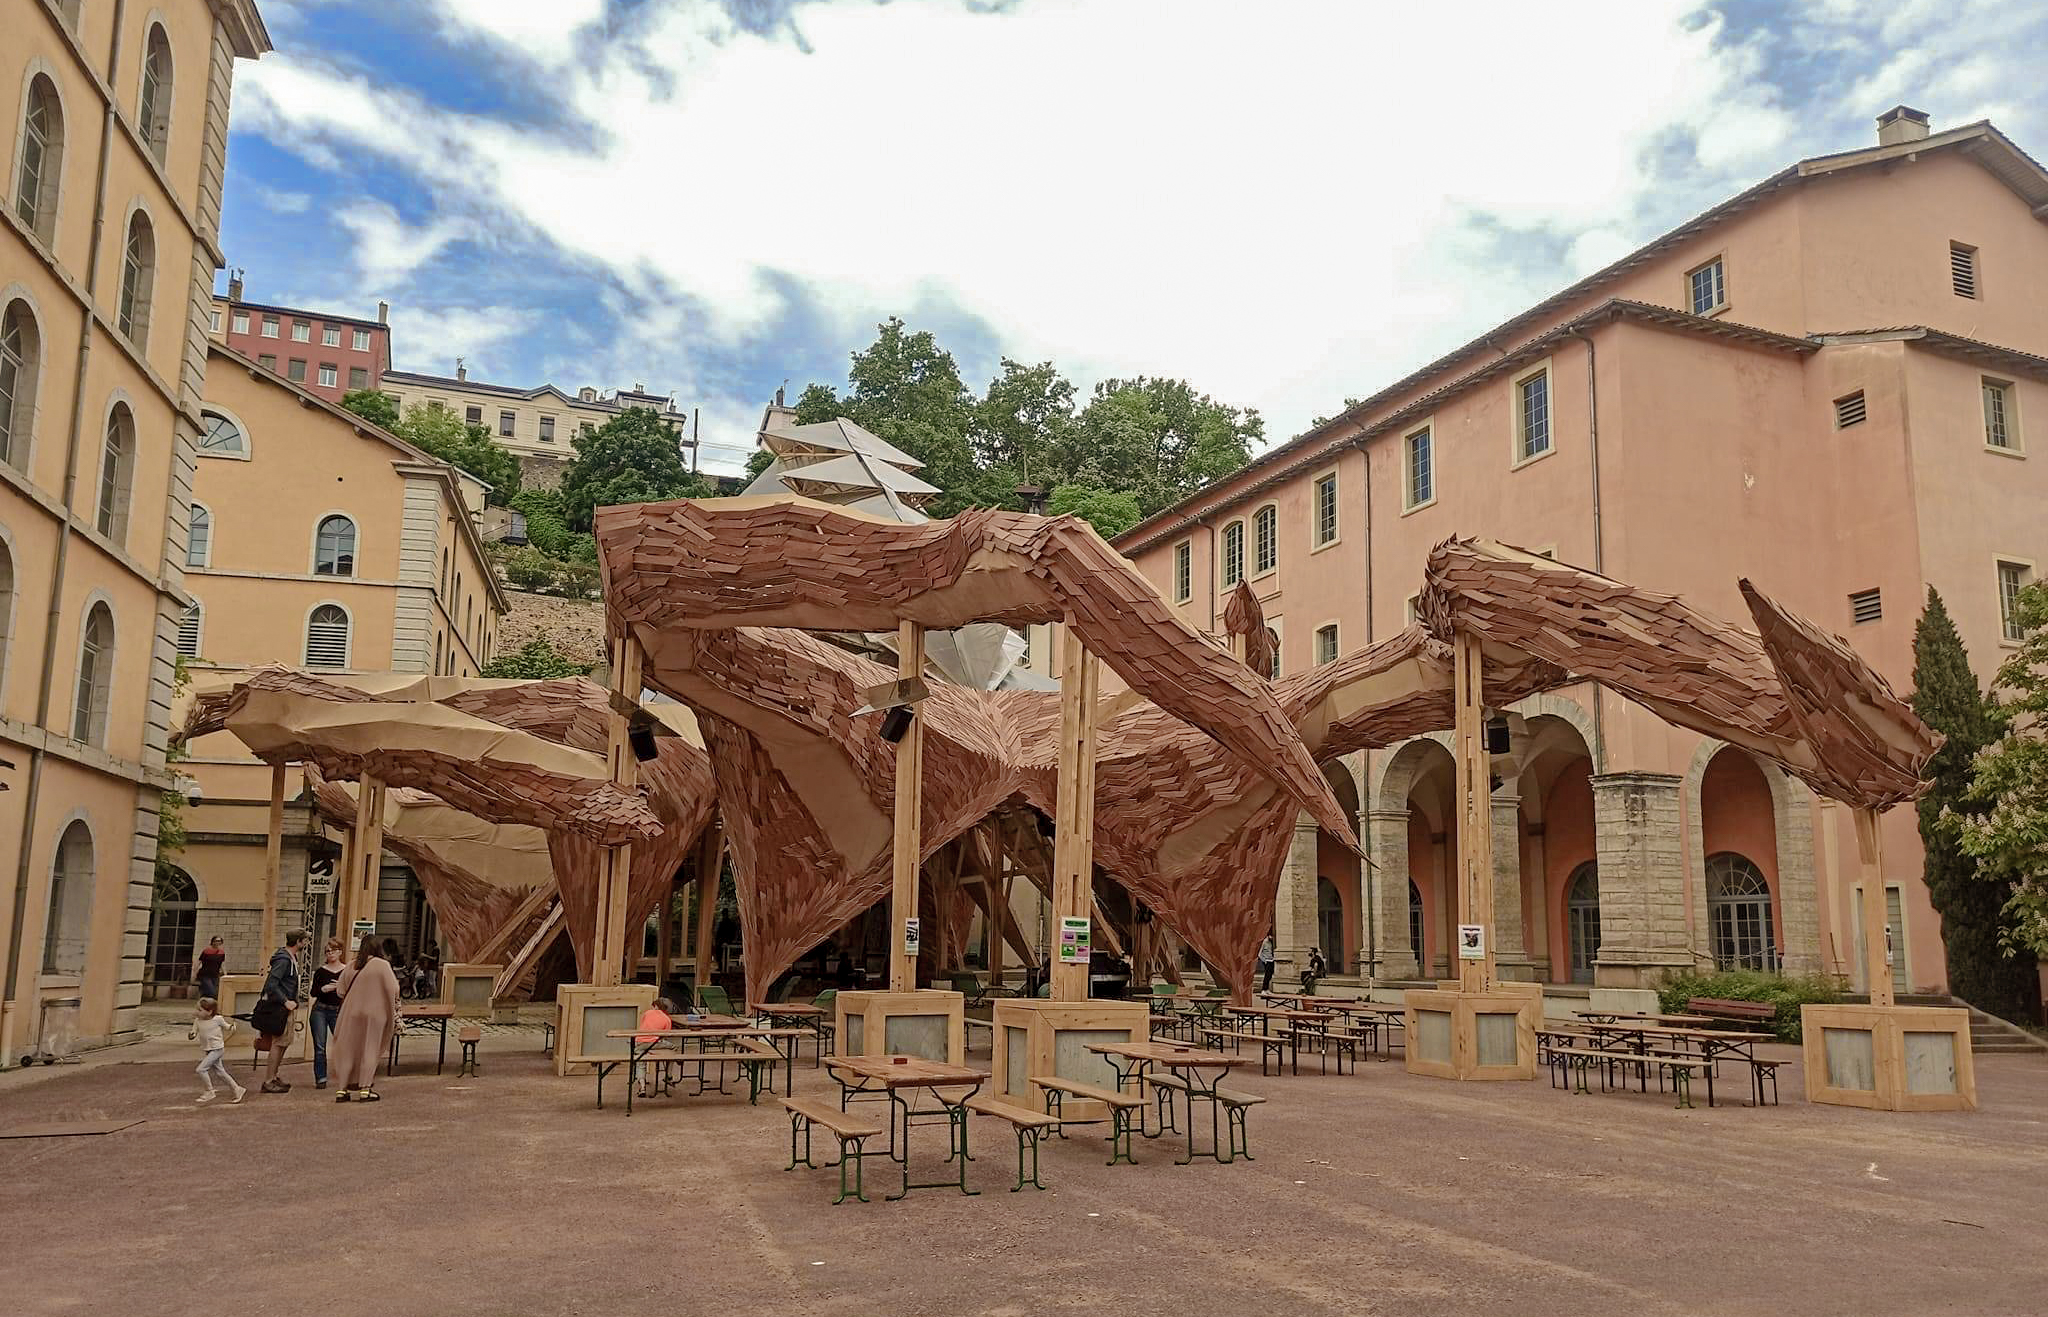 The "Giant Sea Monster" at Les SUBS and The Fine Arts University of Lyon ENSBA